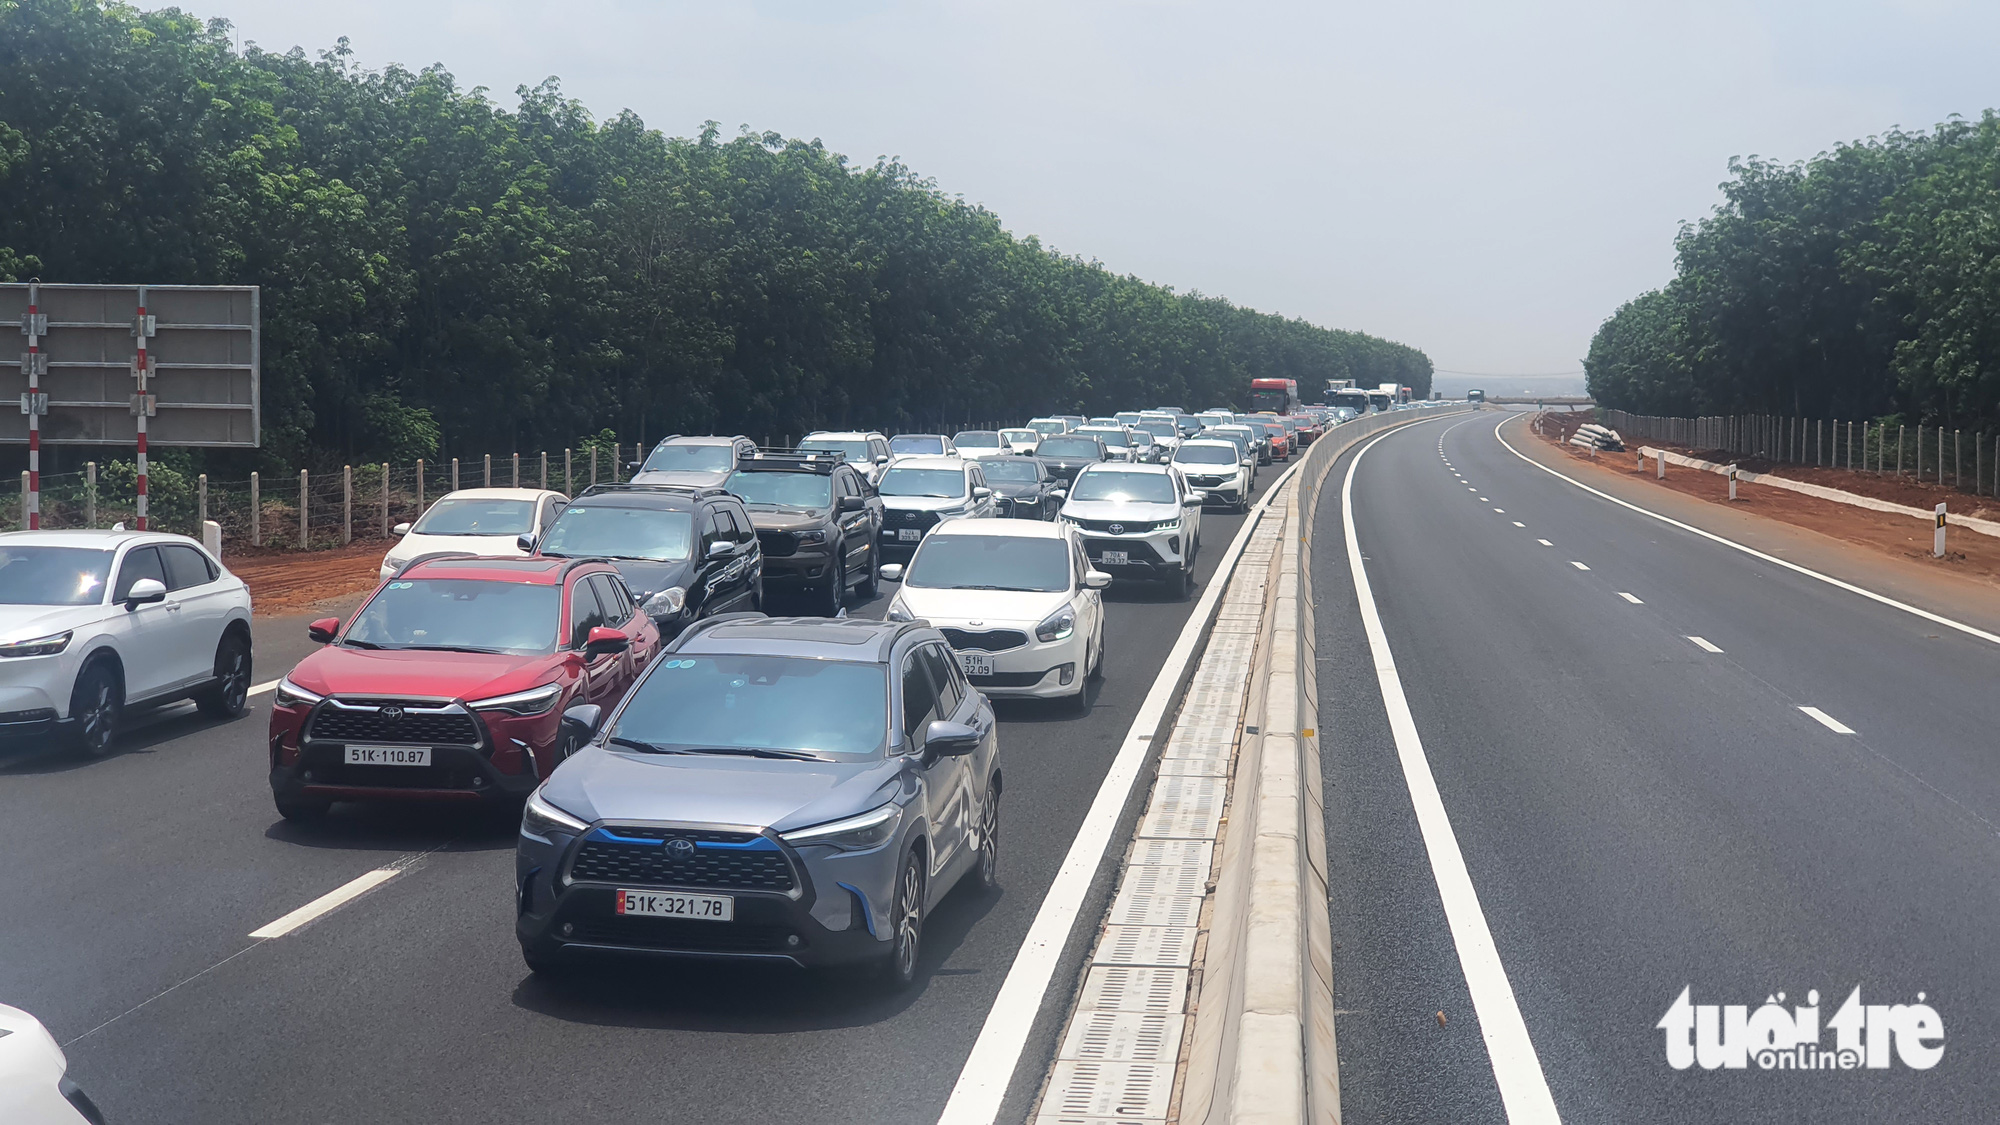 Thousands of vehicles clog Vietnam’s newly-opened expressway